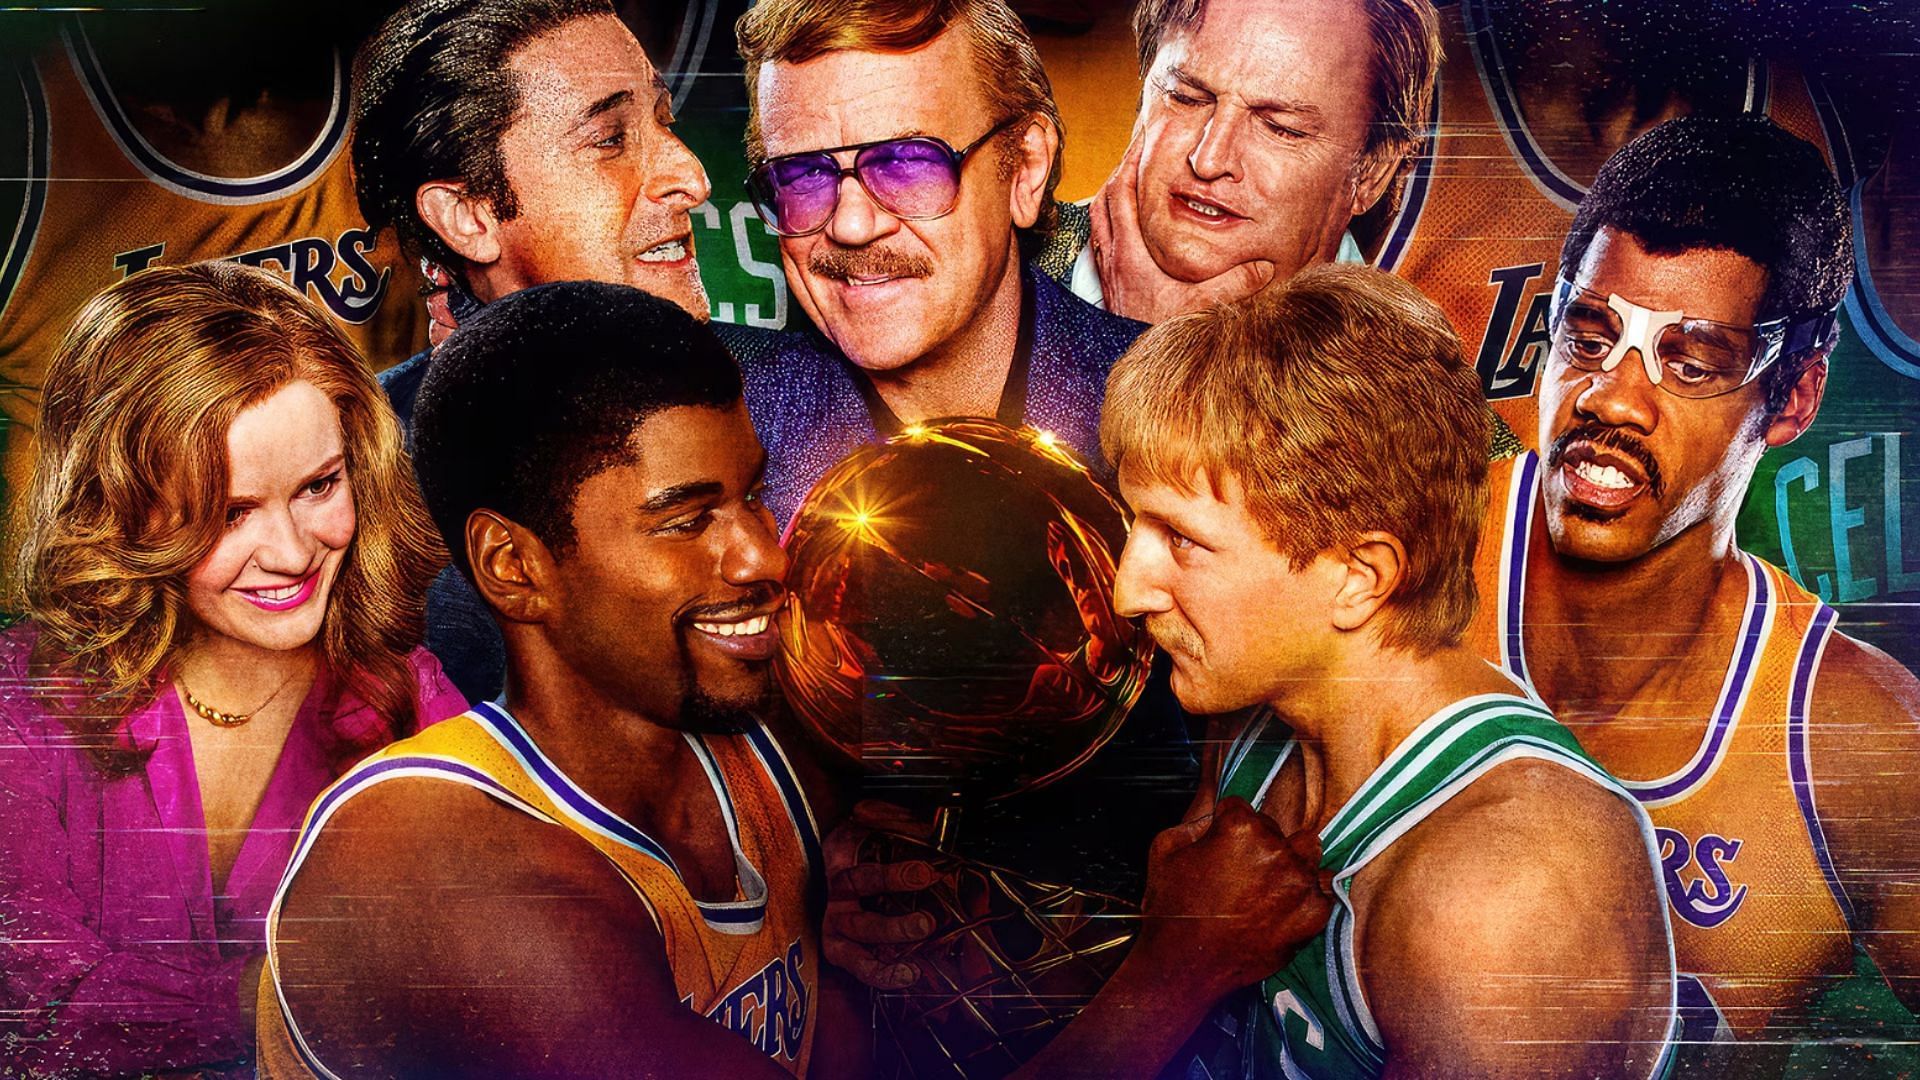 It focuses on the era wherein the Lakers enthralled fans with their run-and-gun style of basketball (Image via HBO)